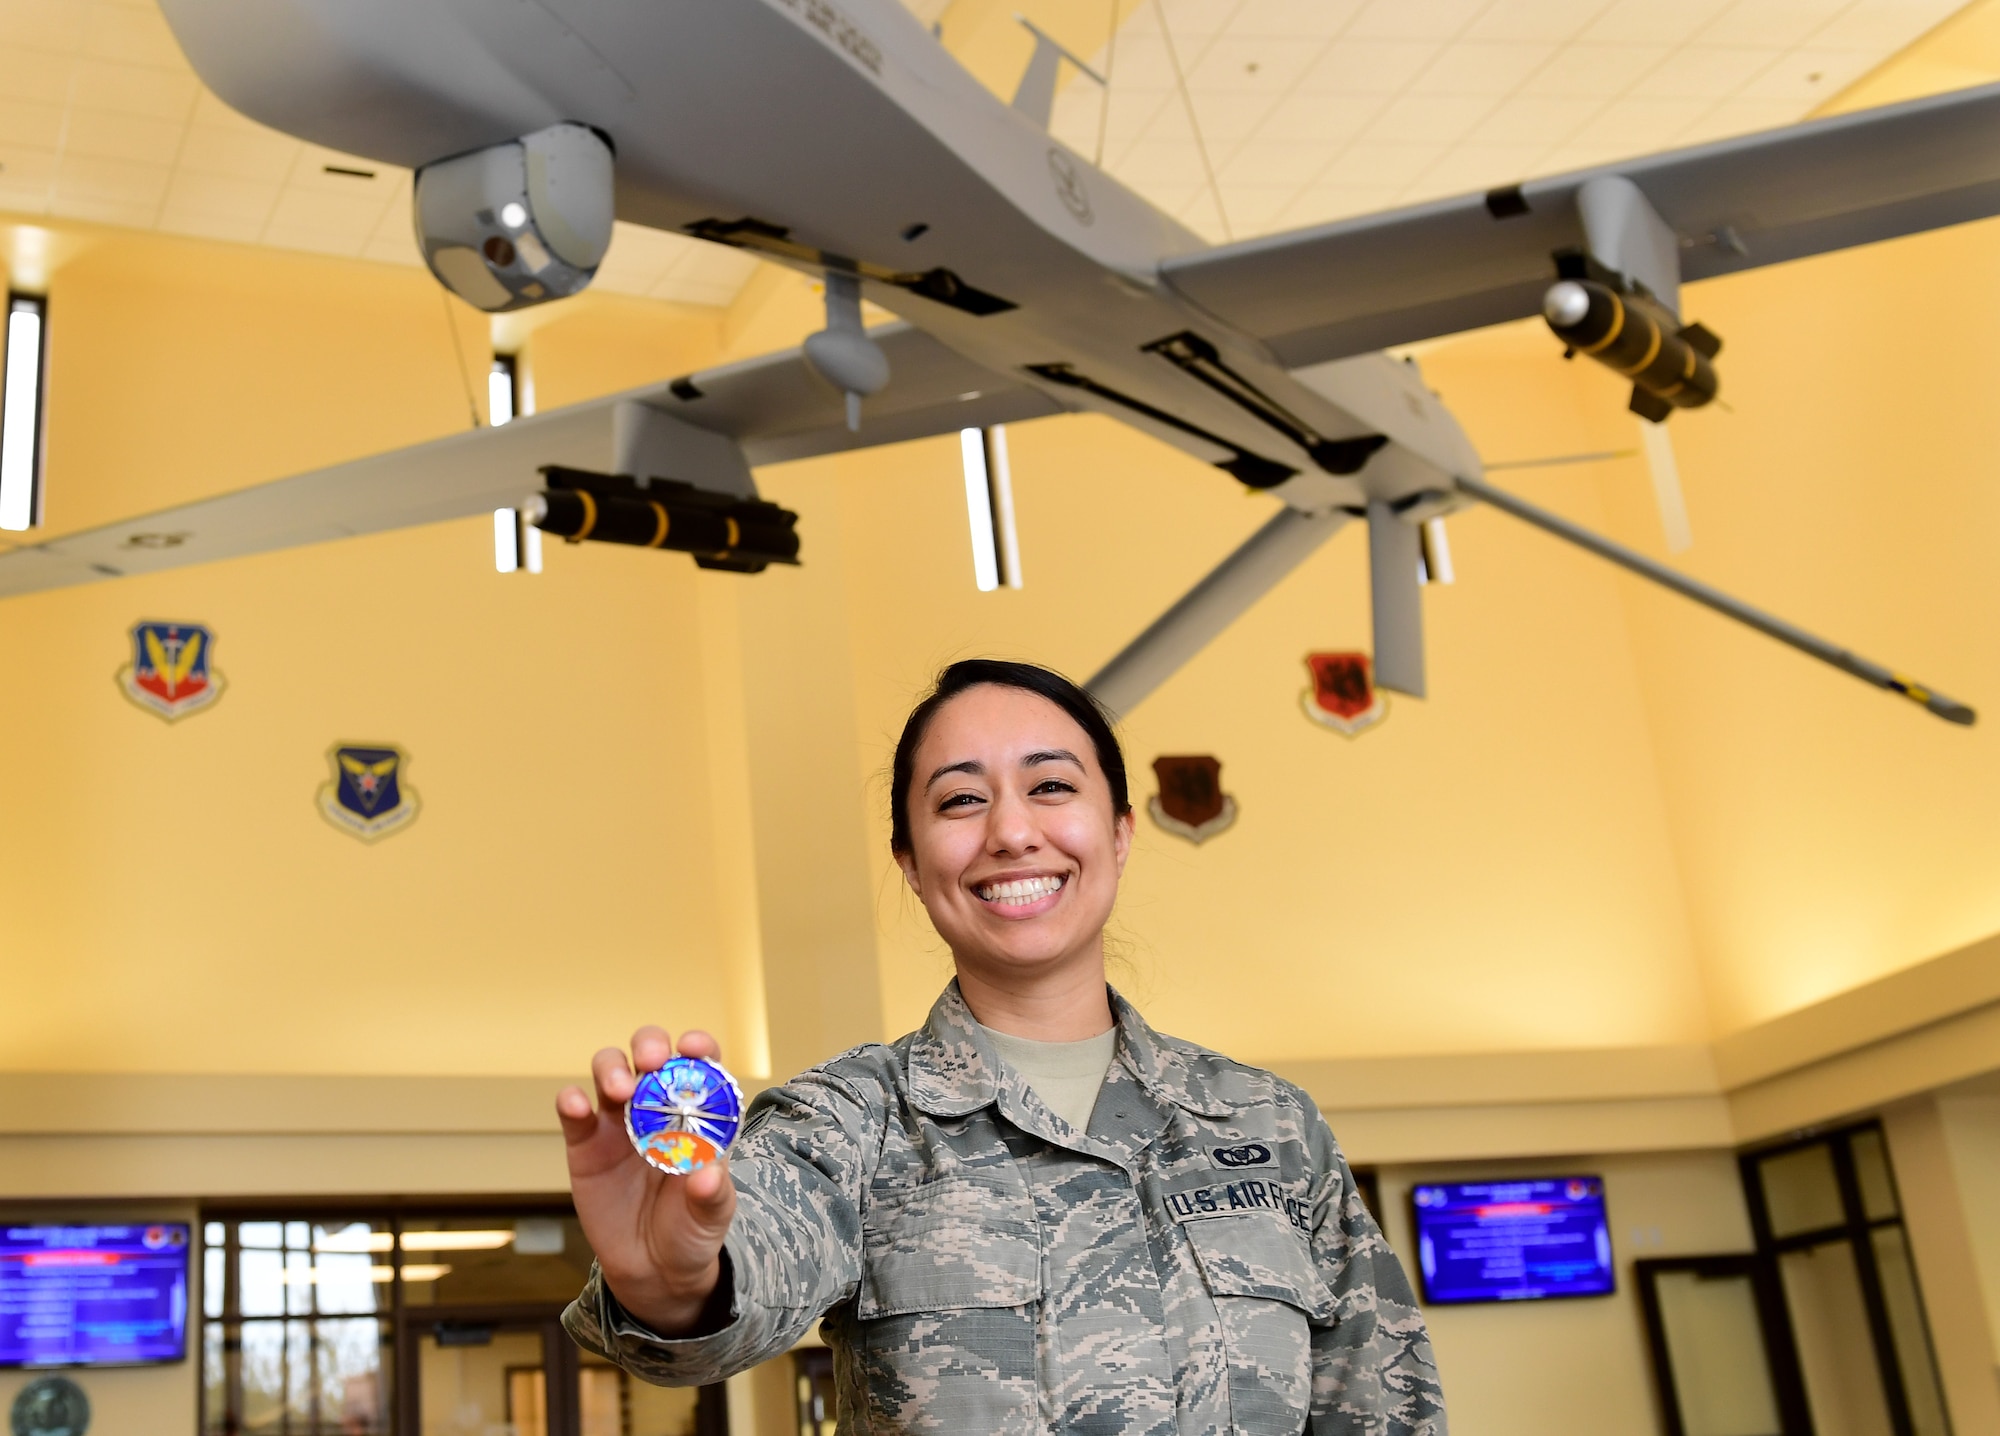 U.S. Air Force 78th Attack Squadron aviation resource manager, shows the coin she received from U.S. Air Force Lt. Gen. Joseph Guastella, U.S. Air Forces Central Command commander, at Creech Air Force Base, Nevada, Jan. 16, 2019. Guastella coined several 432nd Wing/432nd Expeditionary Wing and 799th Air Base Group outstanding Airmen. (U.S. Air Force photo by Senior Airman Christian Clausen)